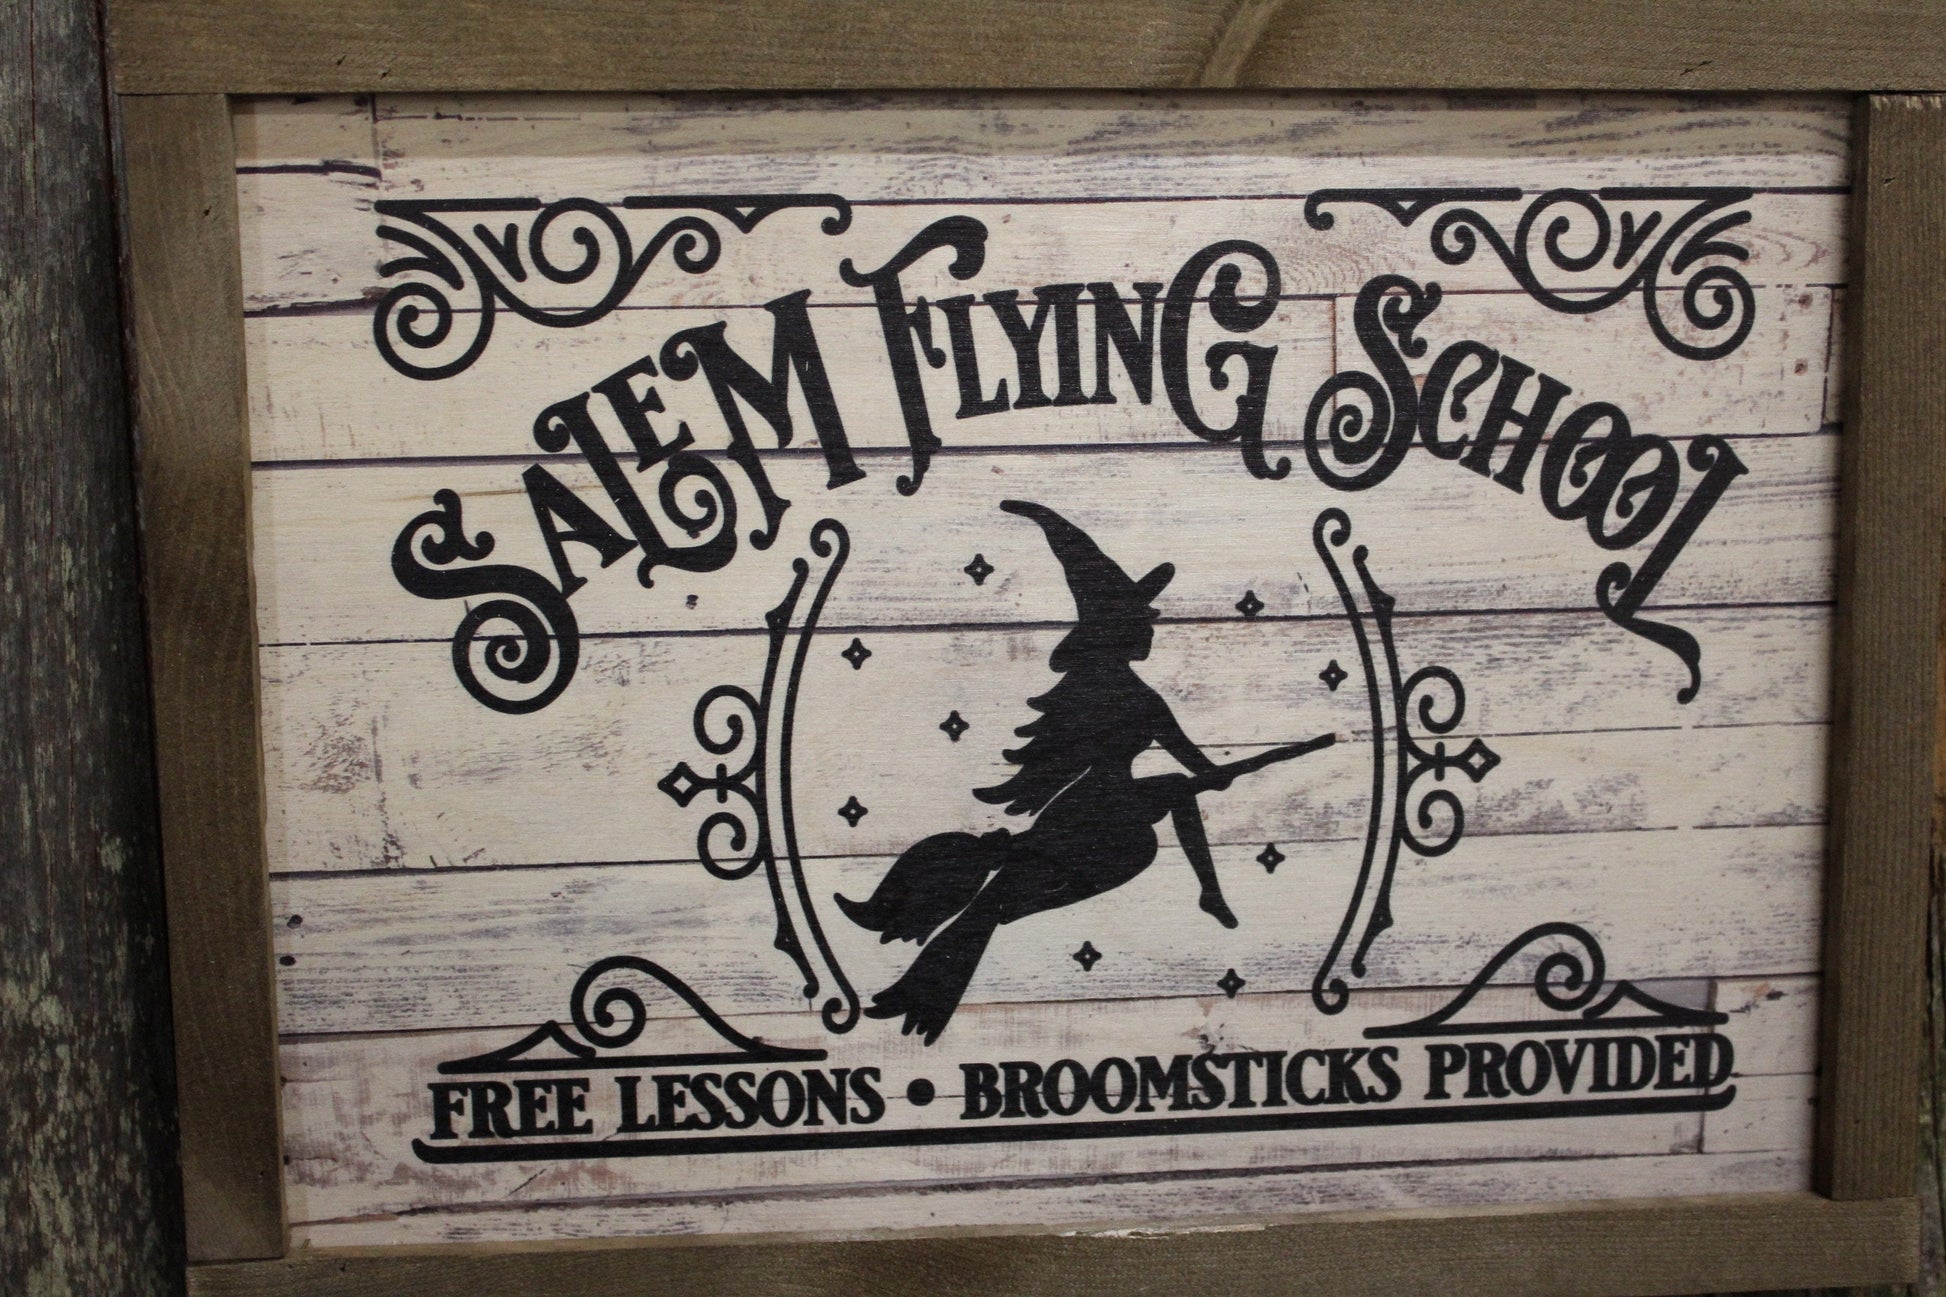 Salem Flying School Wood Sign Halloween Shiplap Rustic Primitive Fall Wall Art Picture Witch Text Script Black Training Broomsticks Lessons